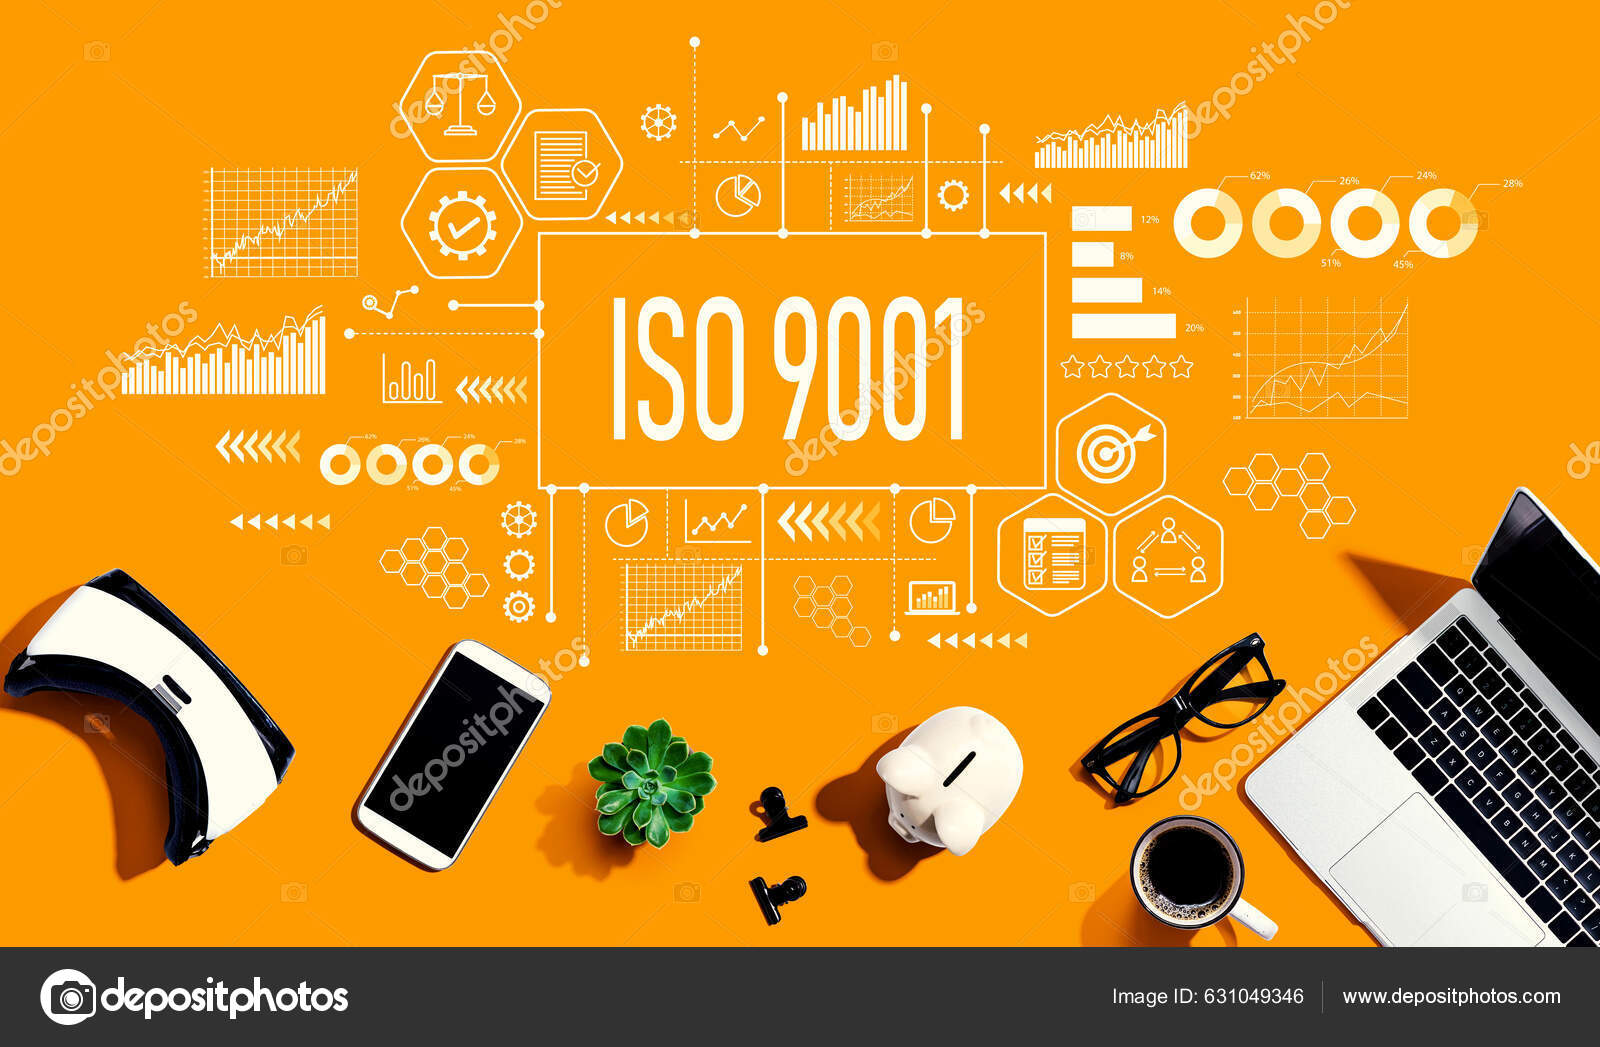 Iso 9001 Theme Electronic Gadgets Office Supplies Flat Lay Stock Photo by  ©Melpomene 631049346